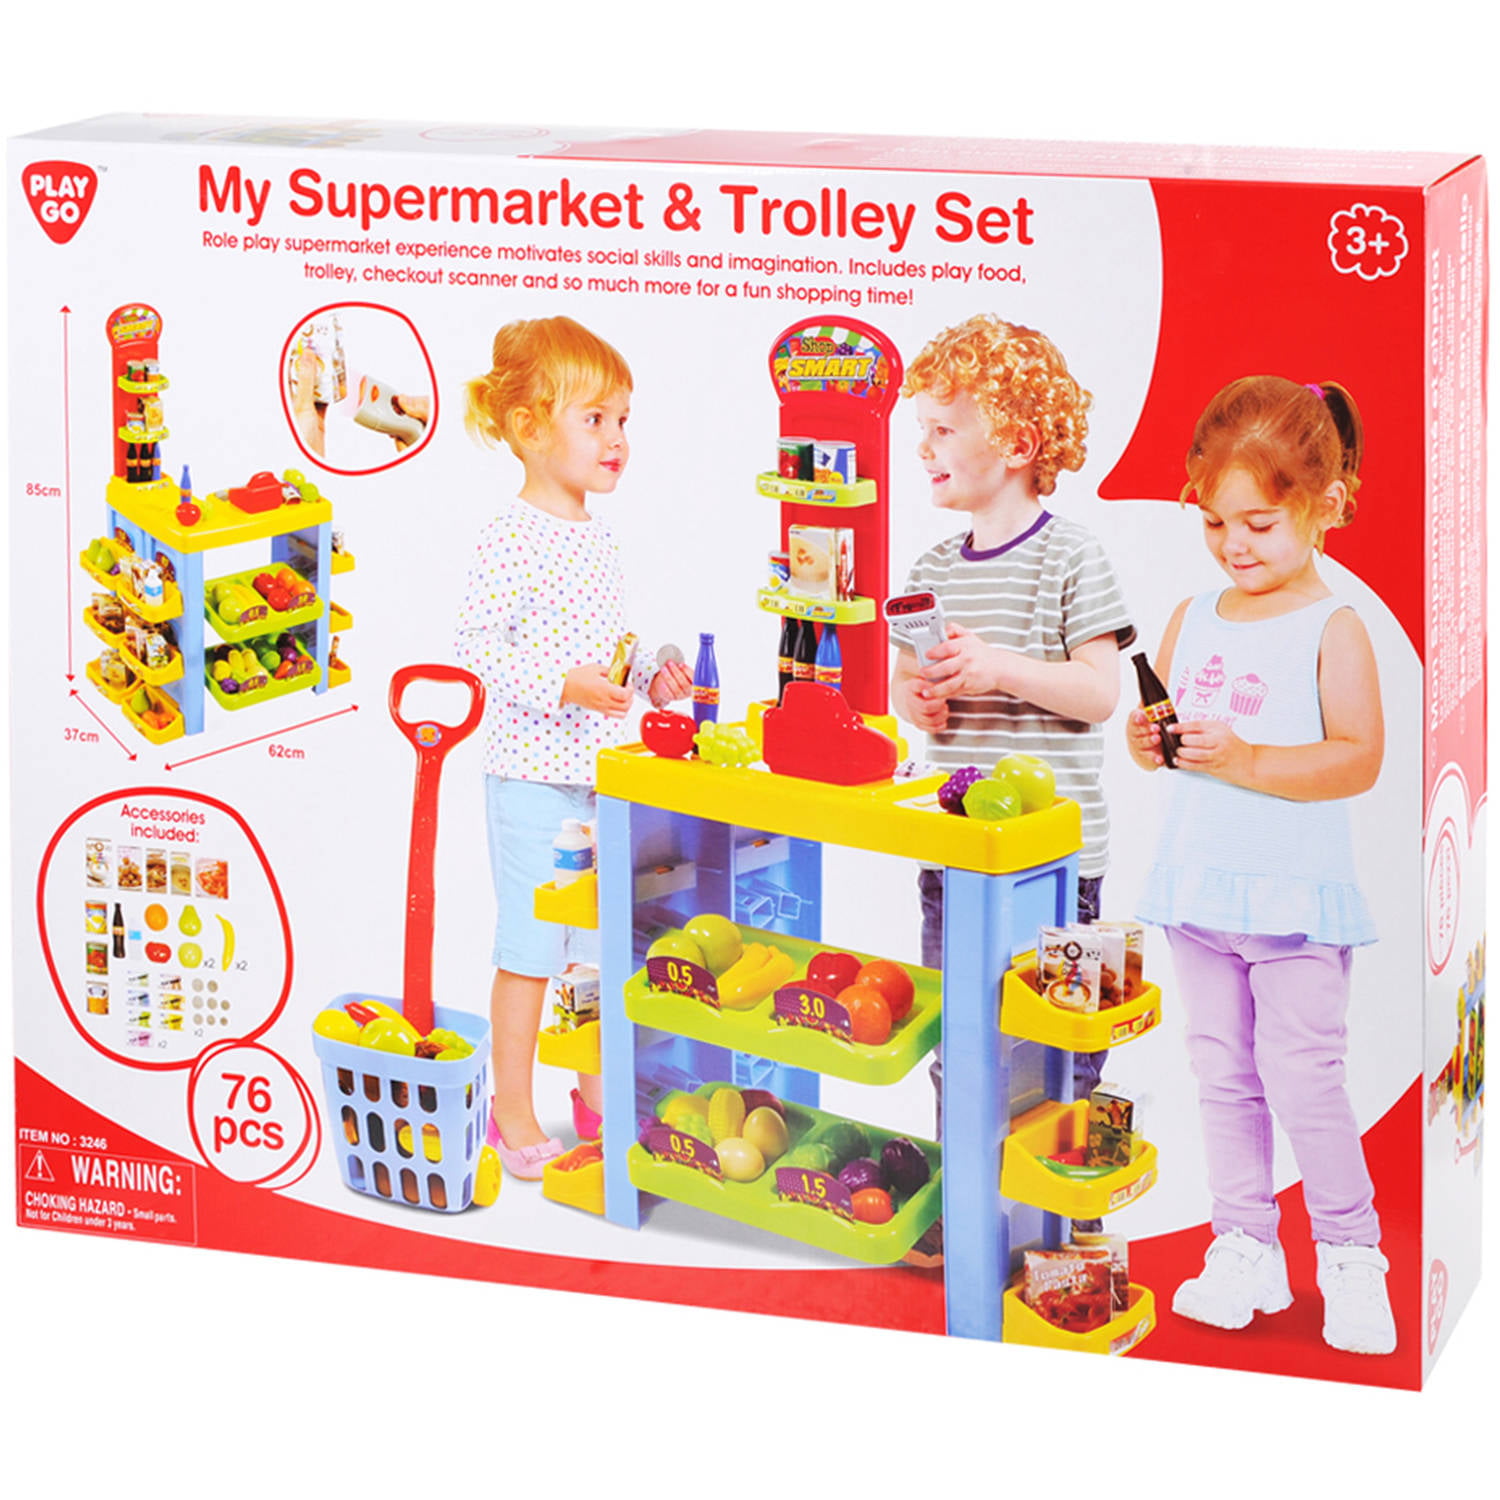 76 Piece PlayGo Battery Operated My Supermarket & Trolley Set Pretend Play Children Shopping Activities 